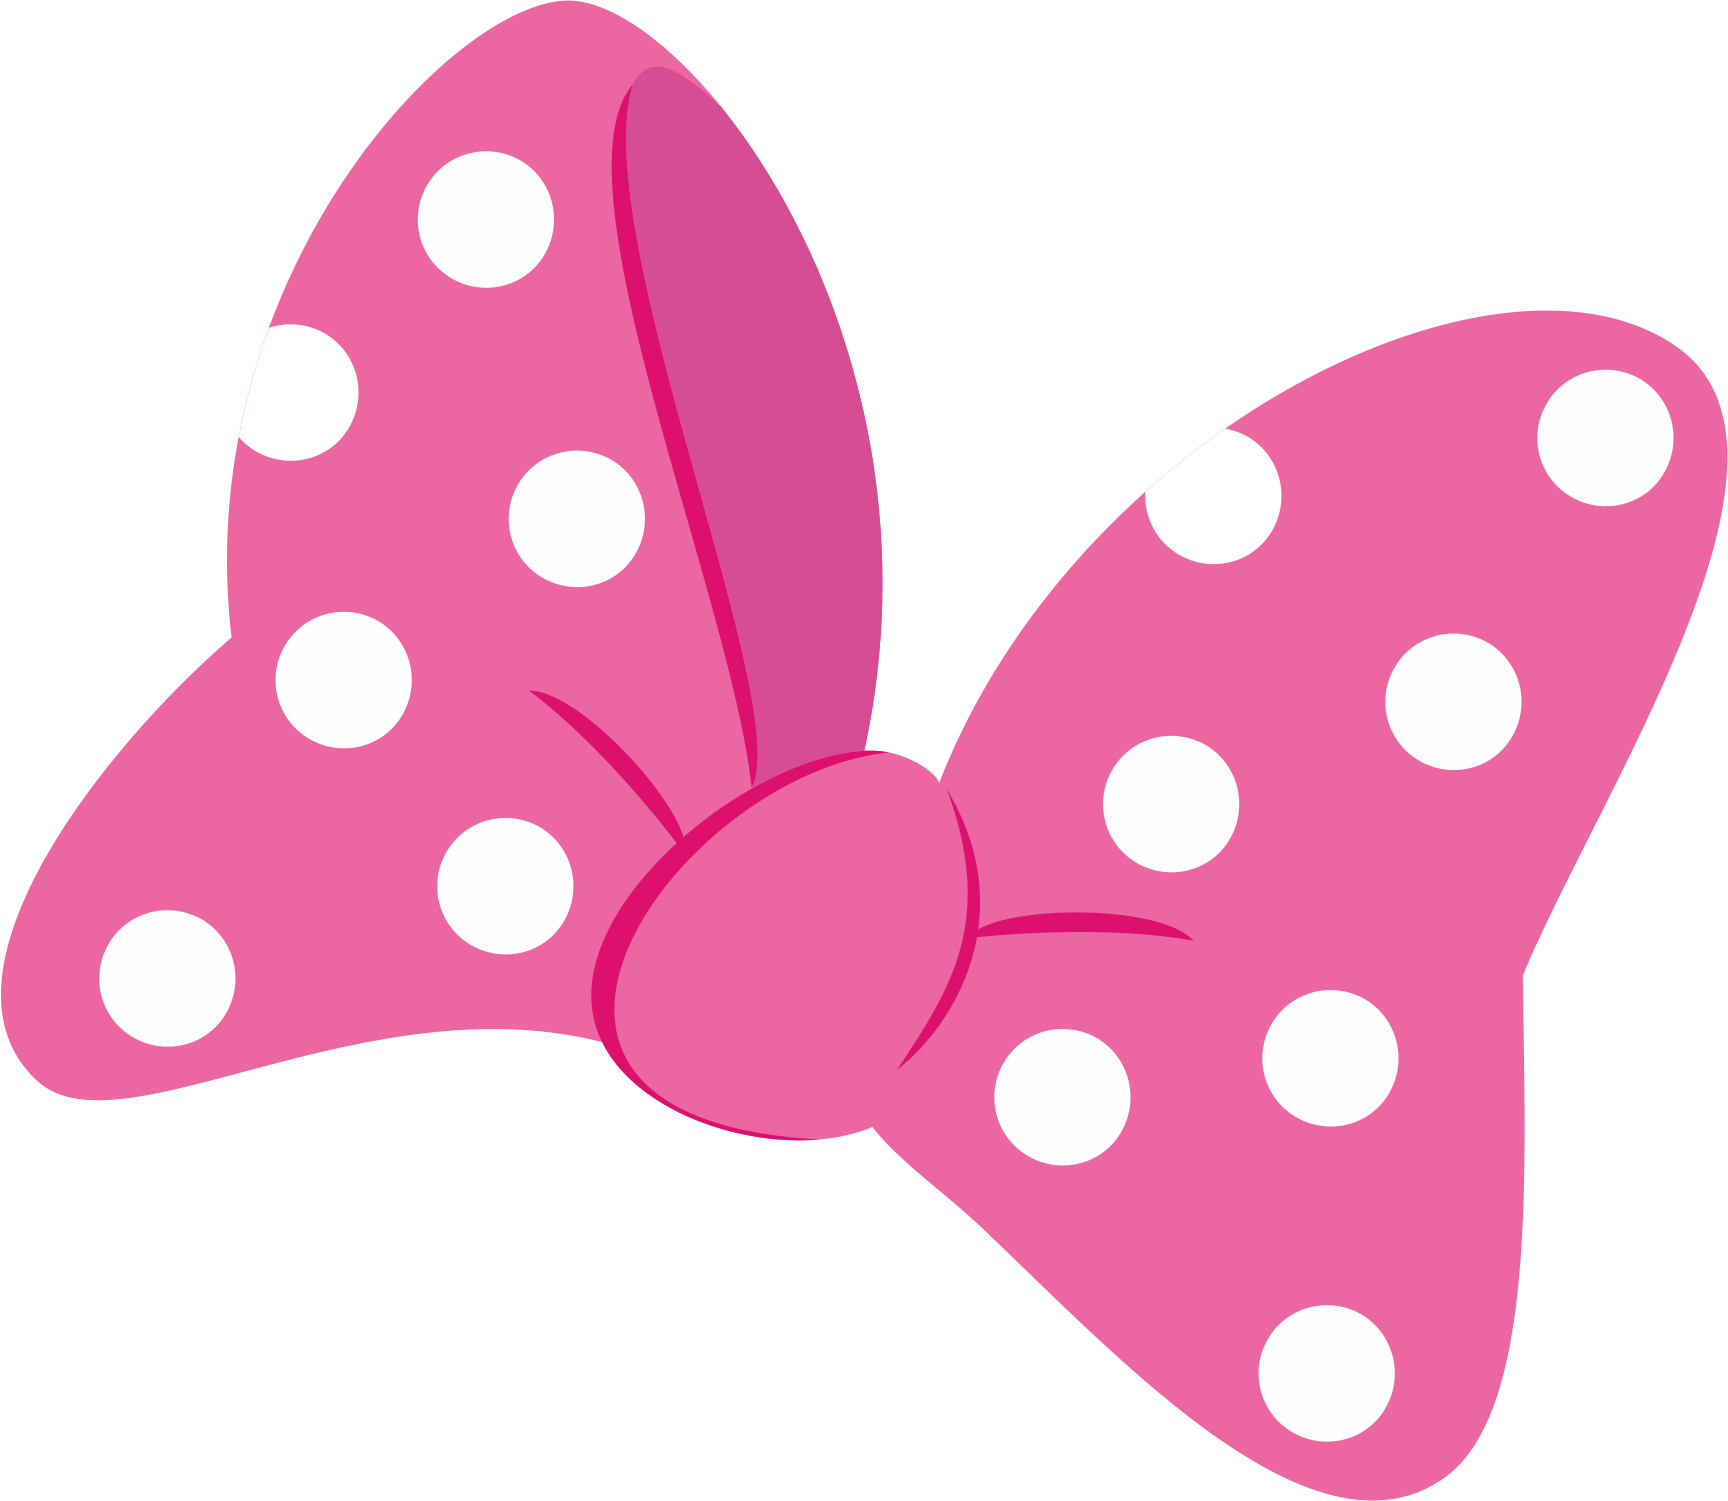 Minnie mouse pink bow clipart